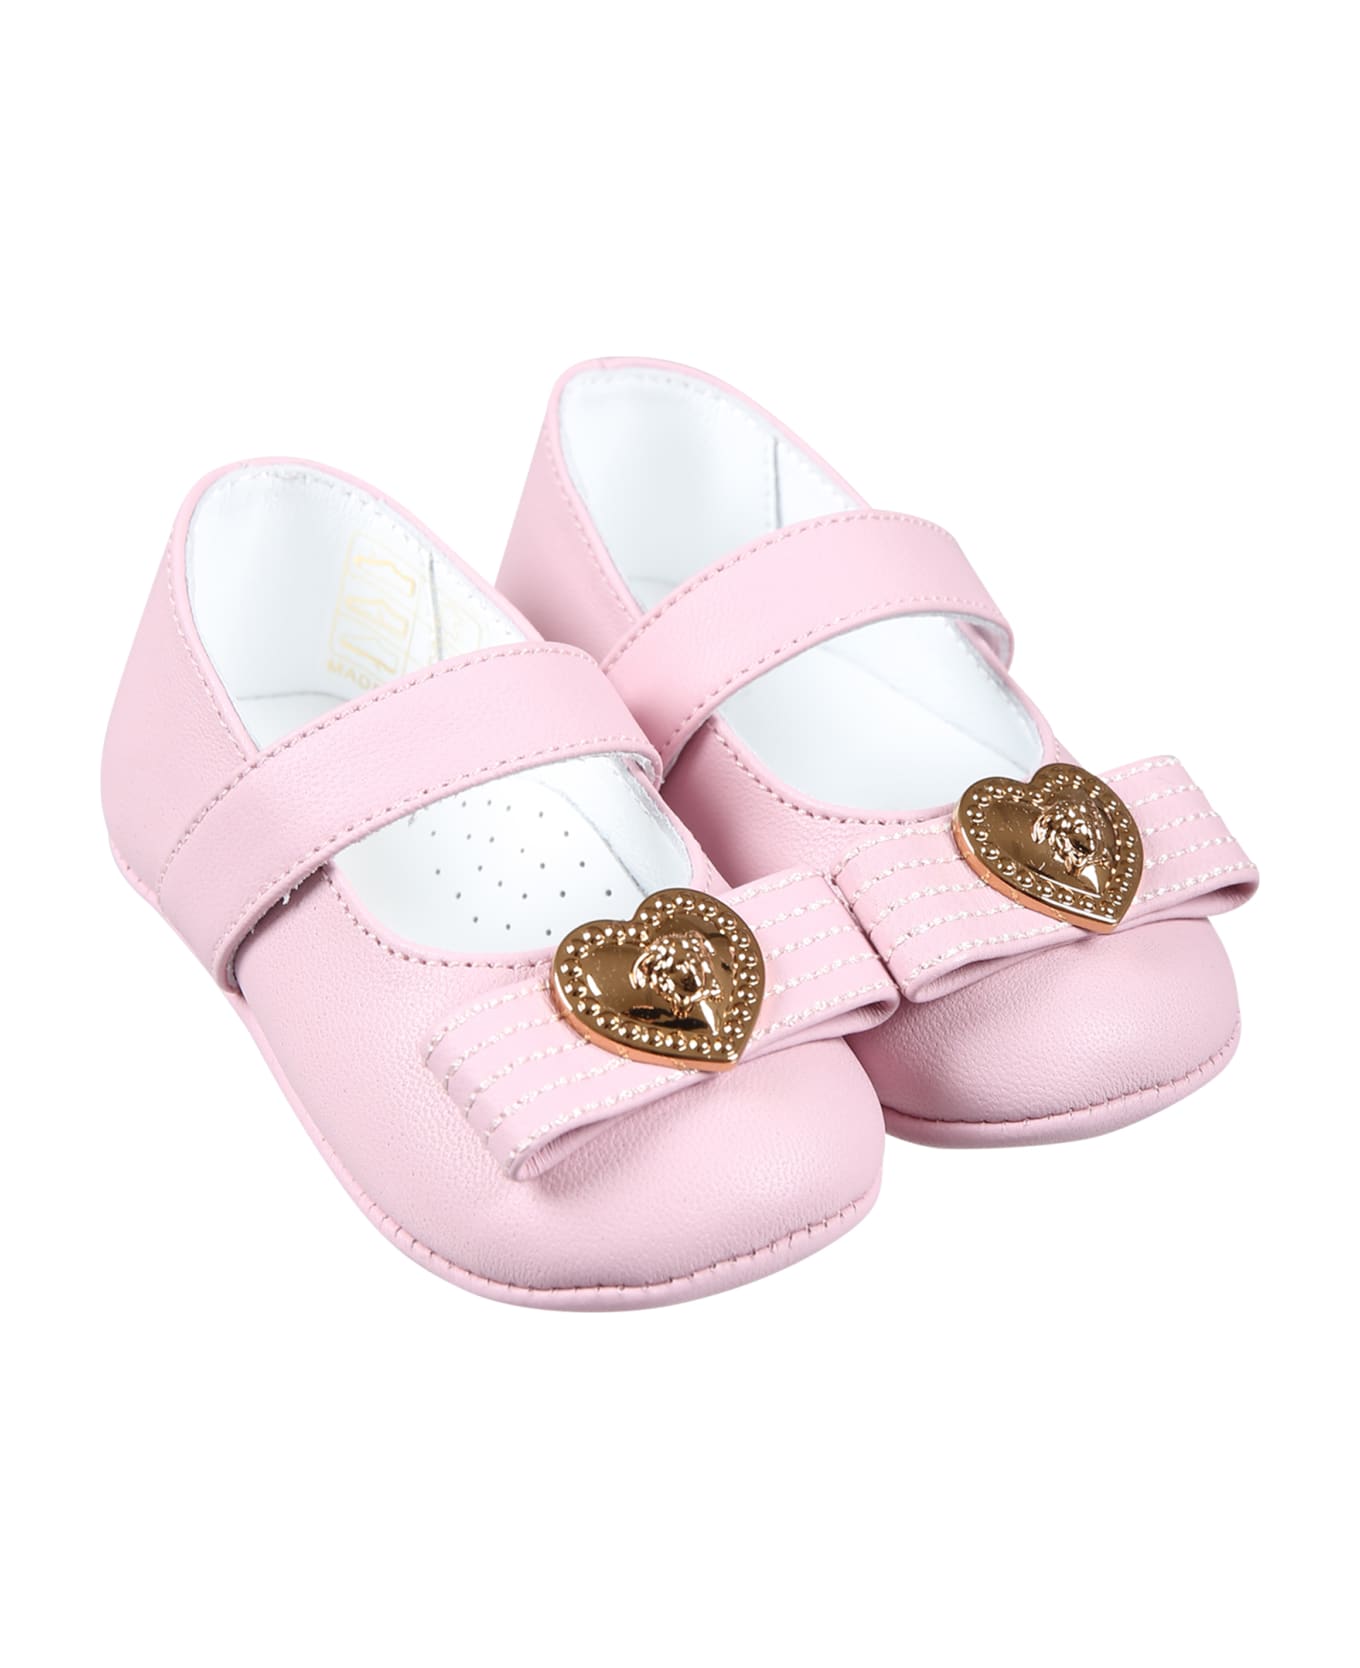 Versace Pink Ballet Flats For Baby Girl With Heart And Medusa - Pink シューズ